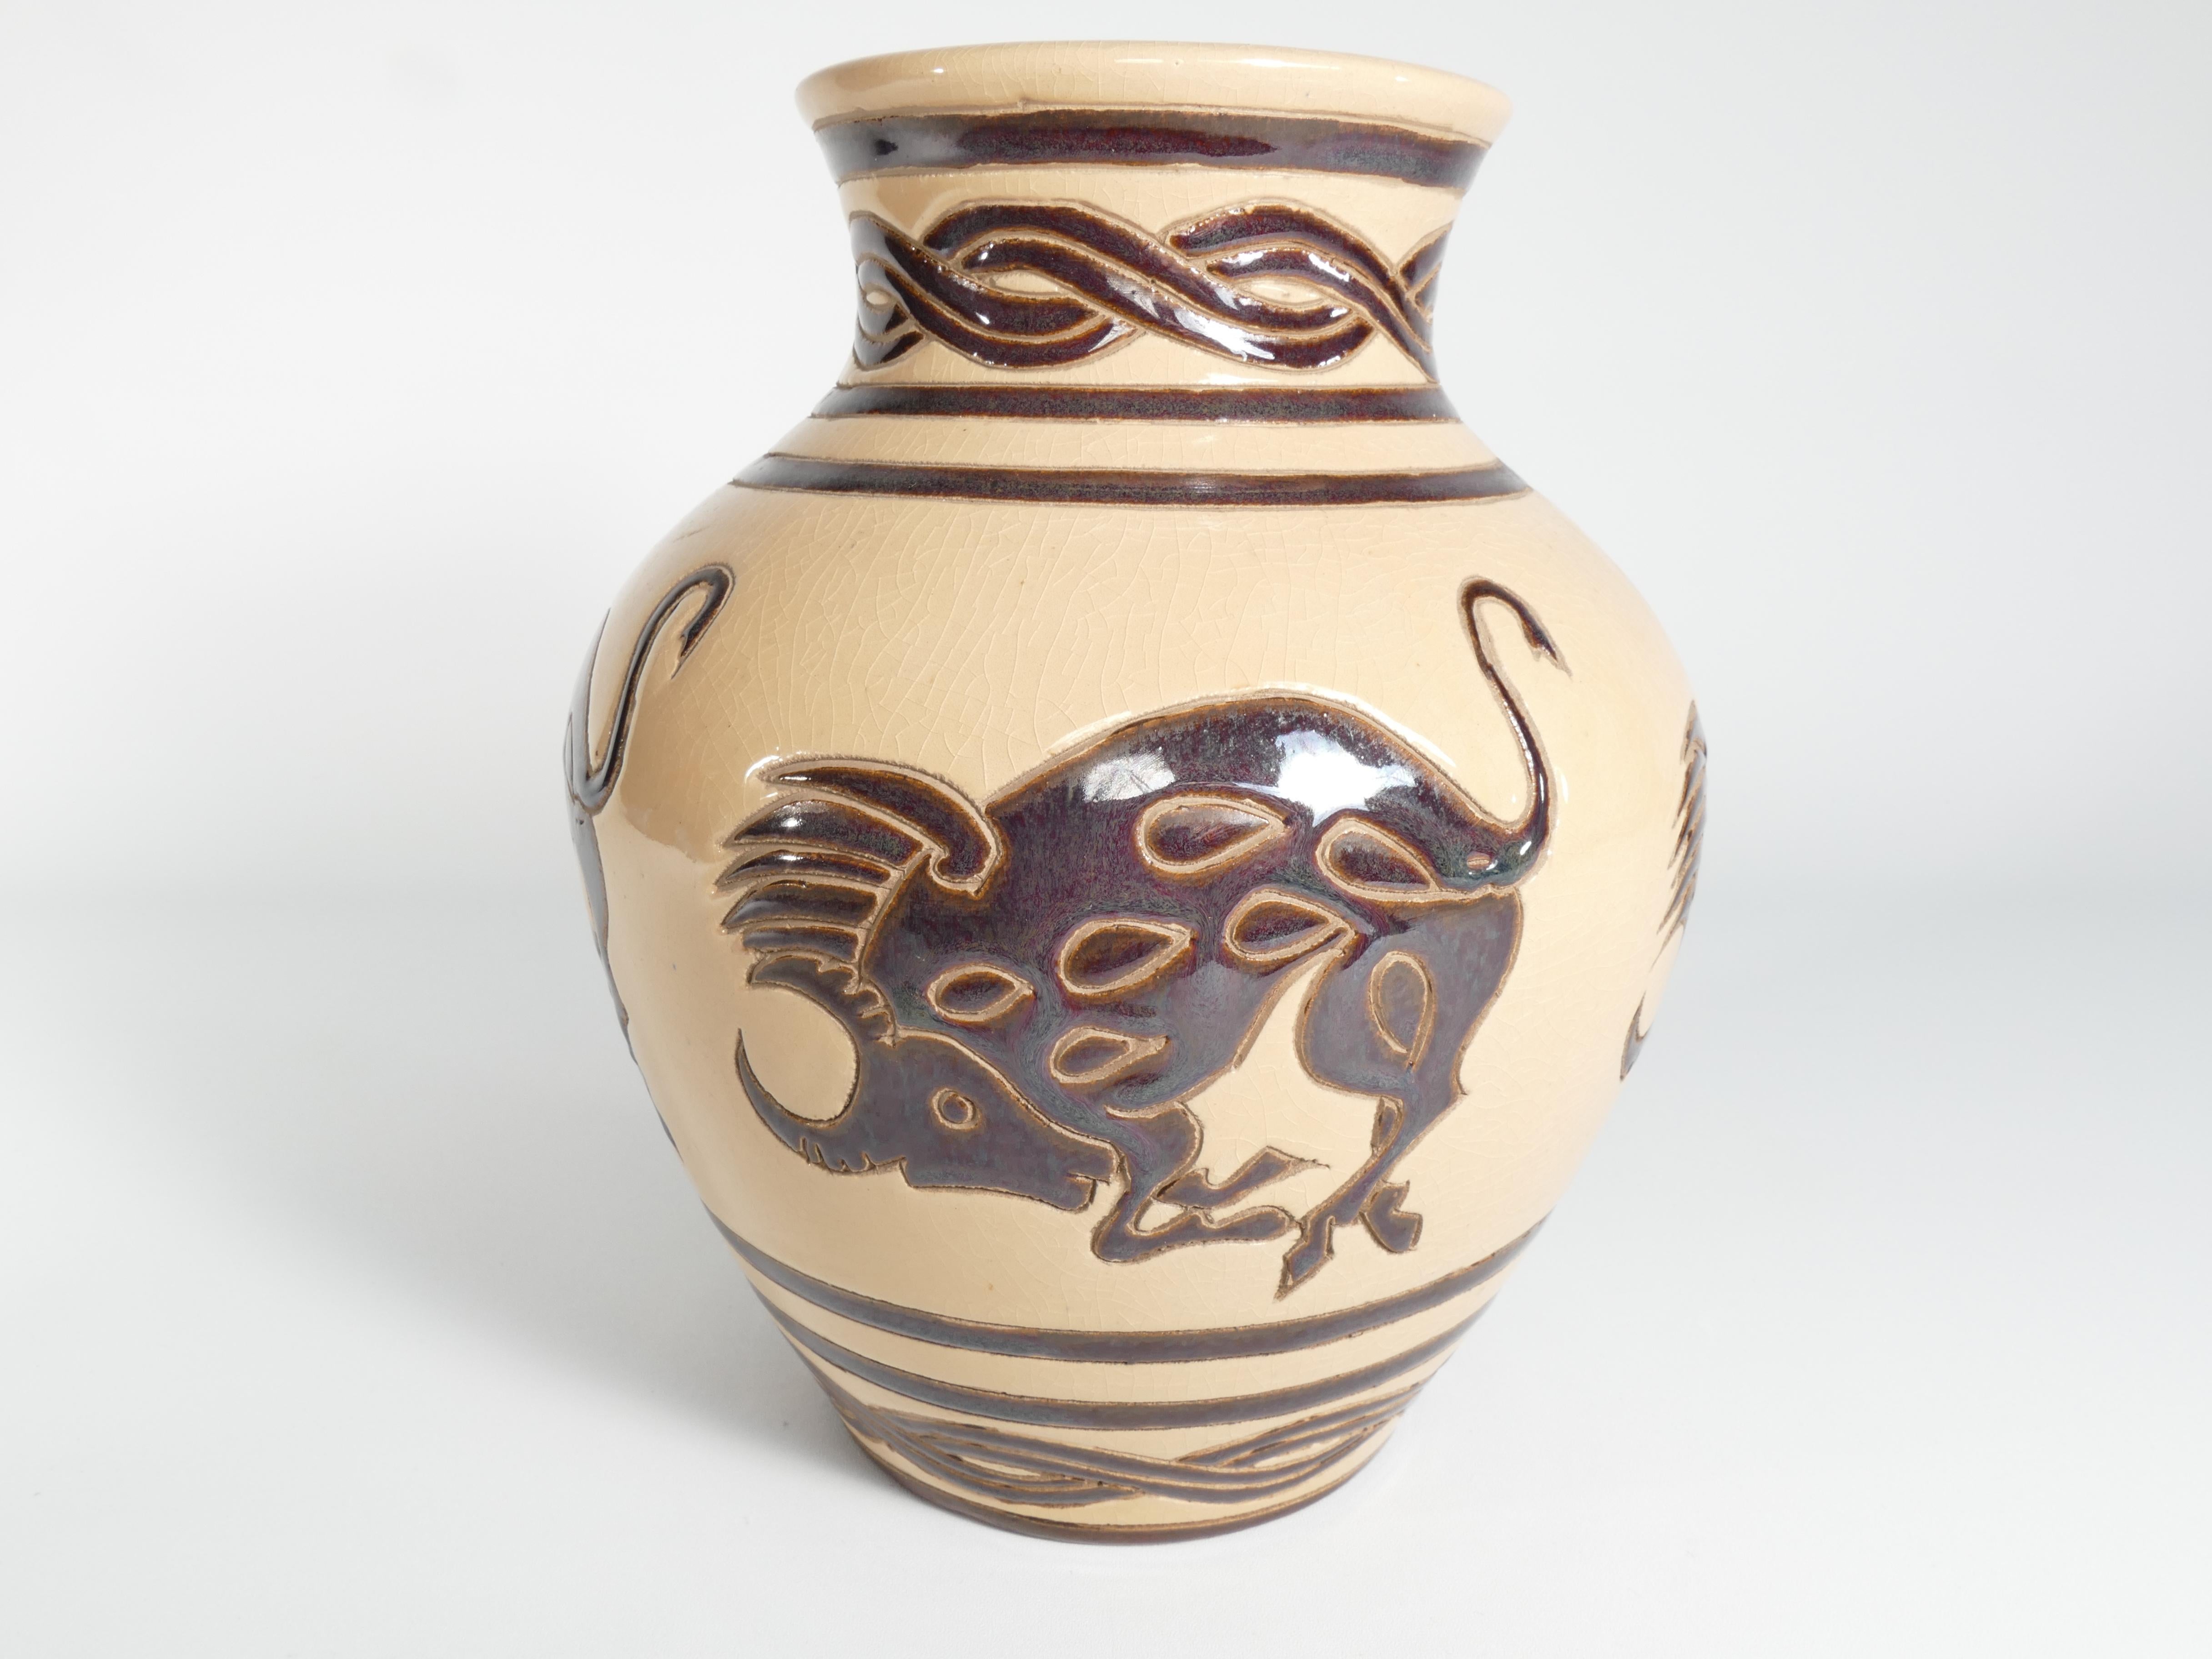 With inspiration from ancient greek pictorial style vases, this beige vase is decorated with bulls and bands in brown paint. The band ornamentations with two bands, twisted bands and then a single band at the at upper body of the vase are mirrored 